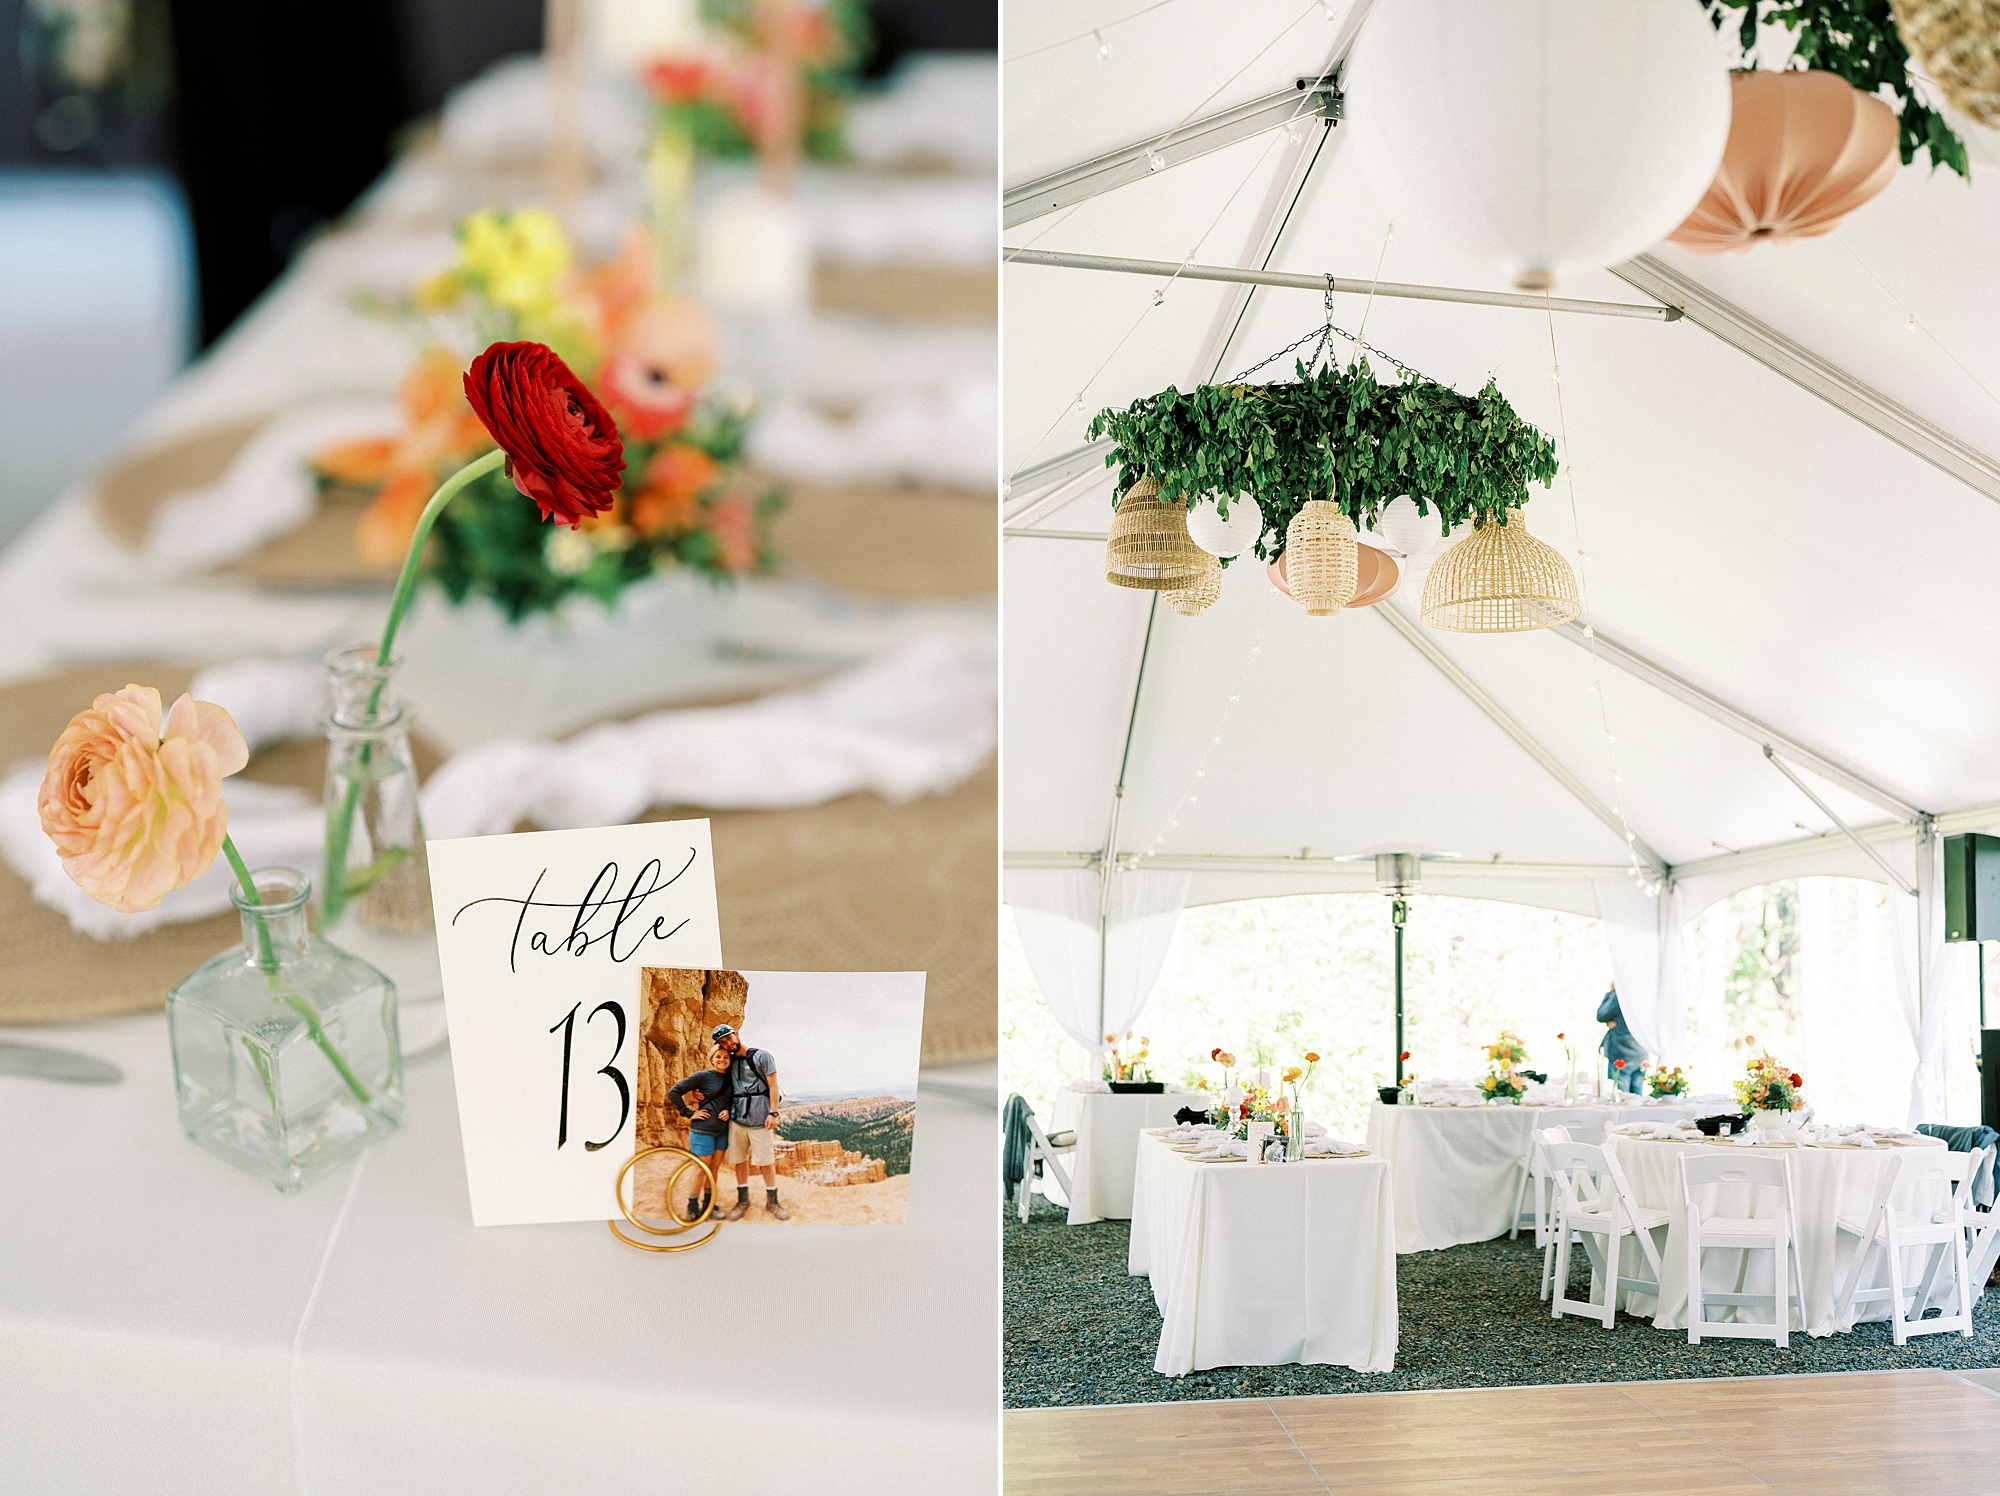 tented wedding reception with hanging greenery installation 